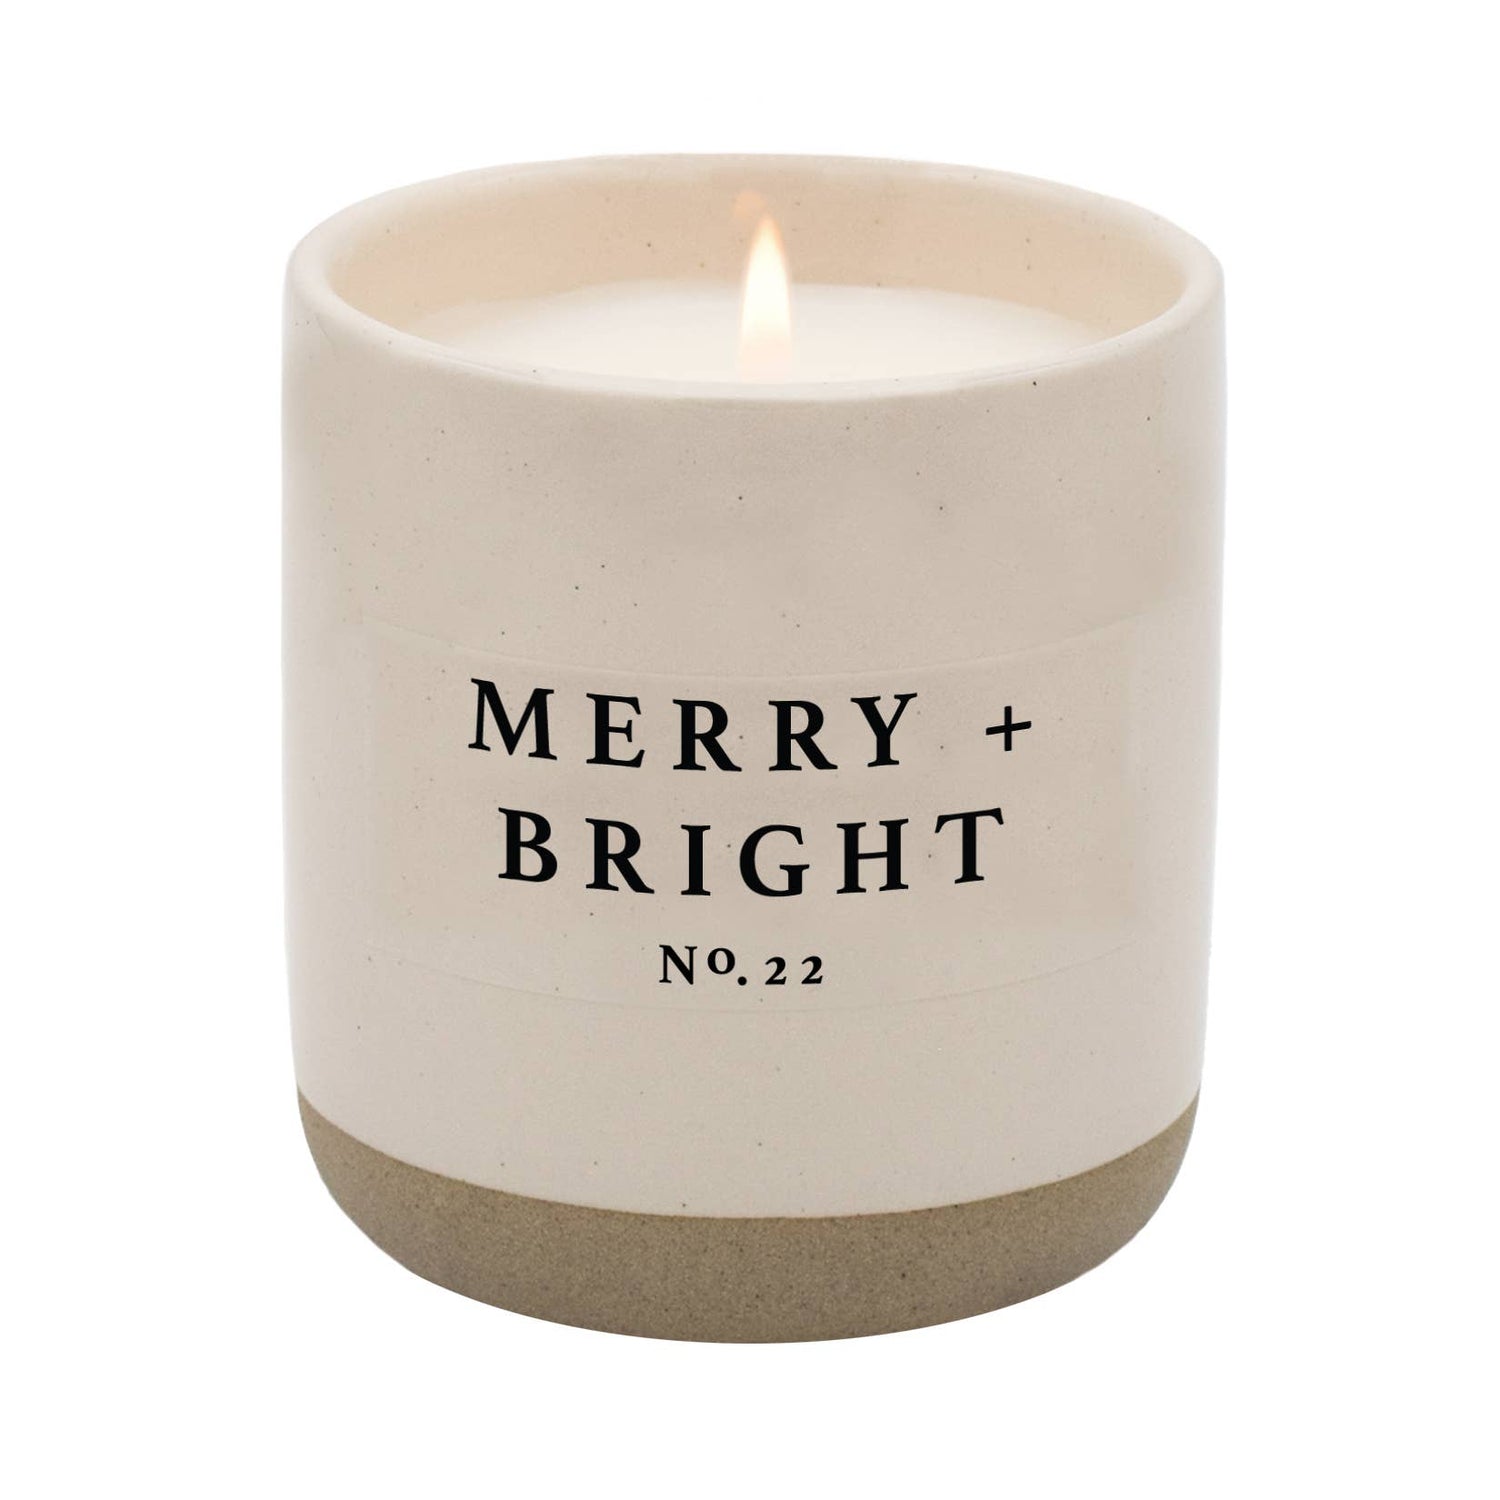 Merry and Bright Soy Candle - Cream Stoneware Jar - 12 oz